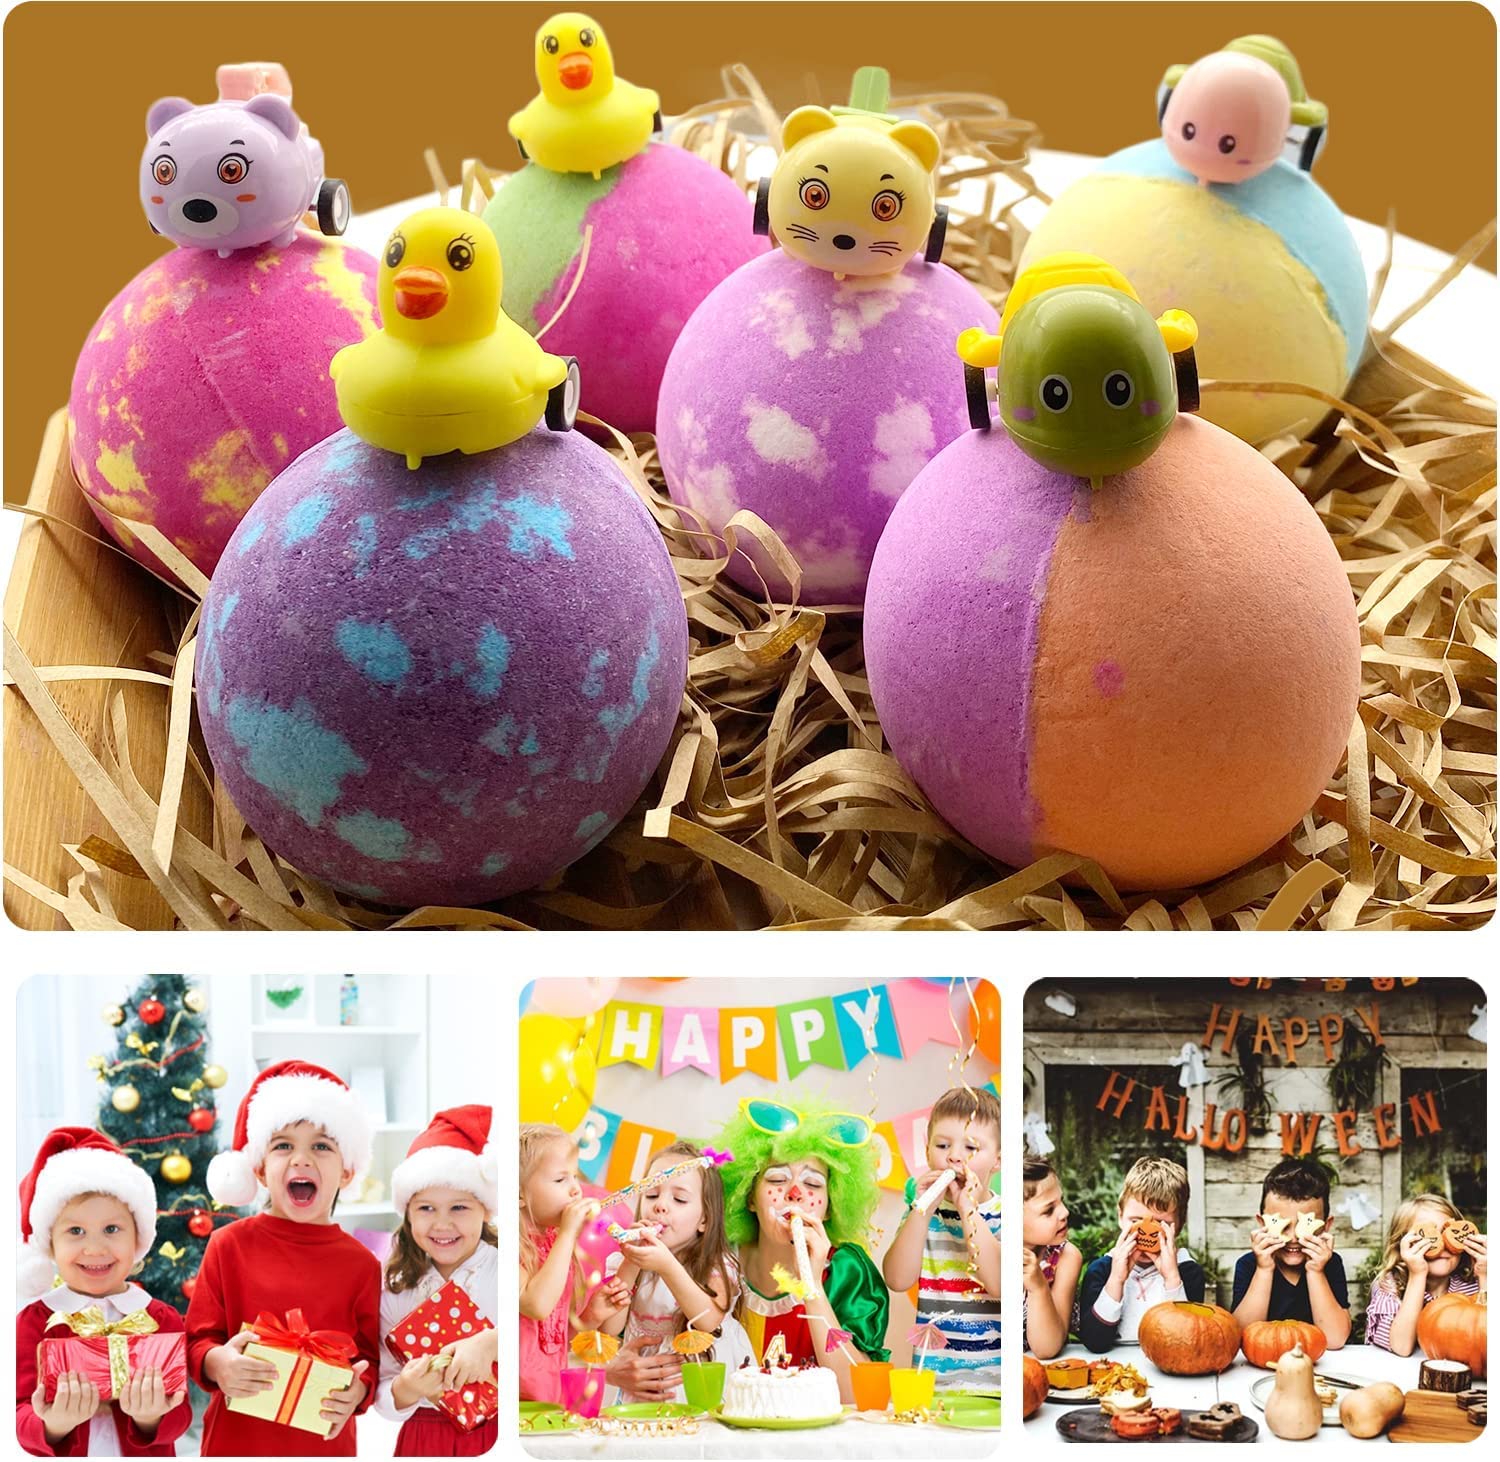 7 Oz Bath Bombs for Kids with Toys Inside Pull-Back Car Surprise 6 Pack Natural Bubble Bath Bombs for Boys Girls with Roll-Back Animal Car Birthday Chirstmas Gift Kit for Child